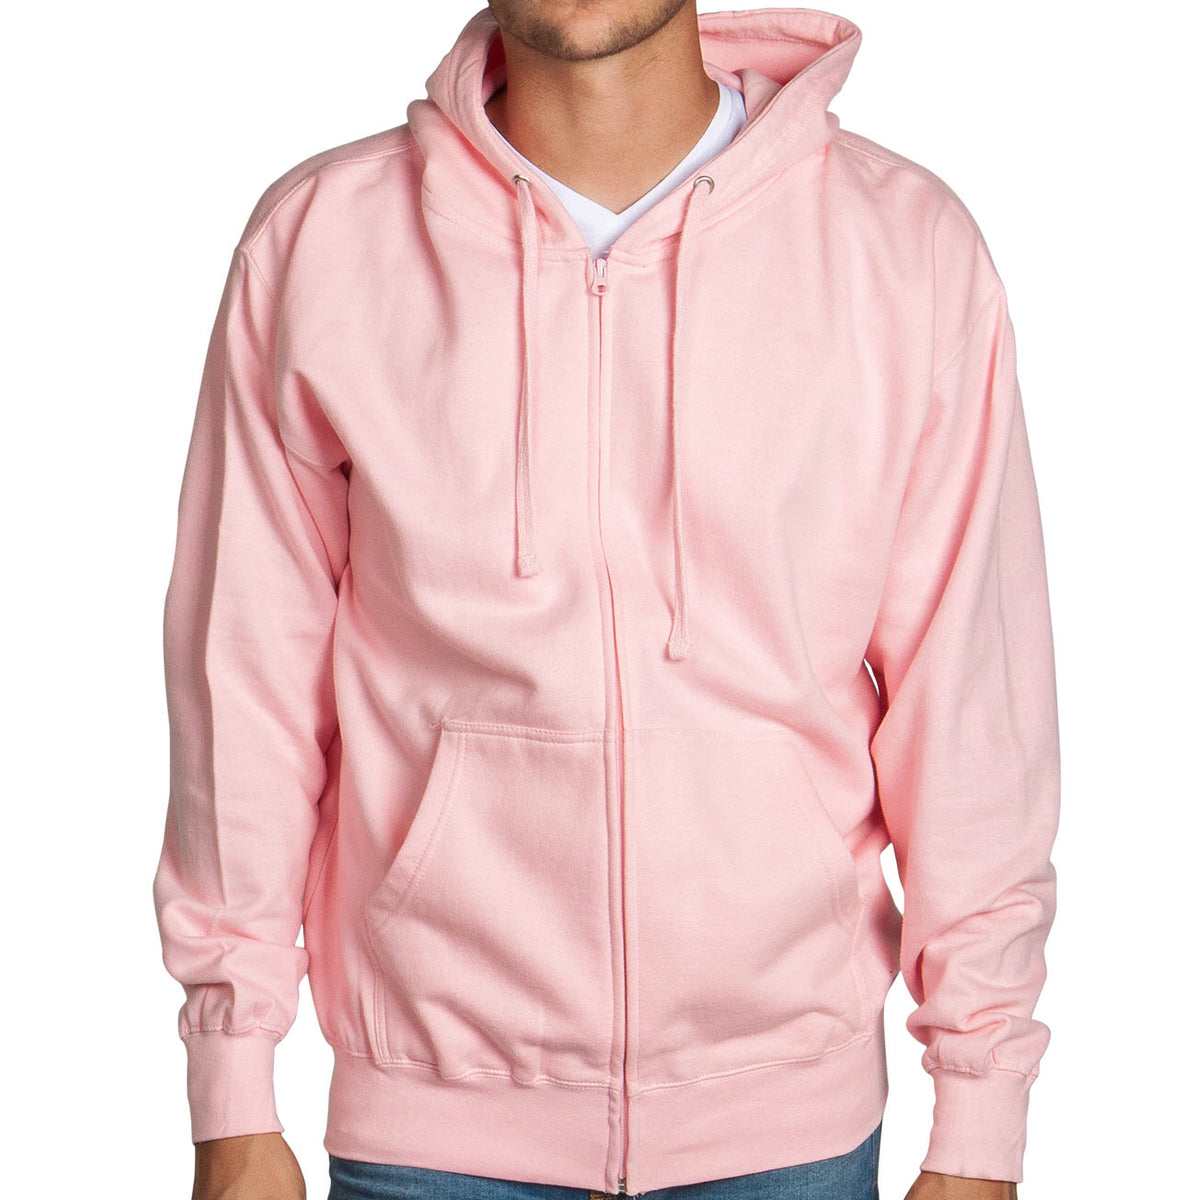 pink yellow and blue hoodie